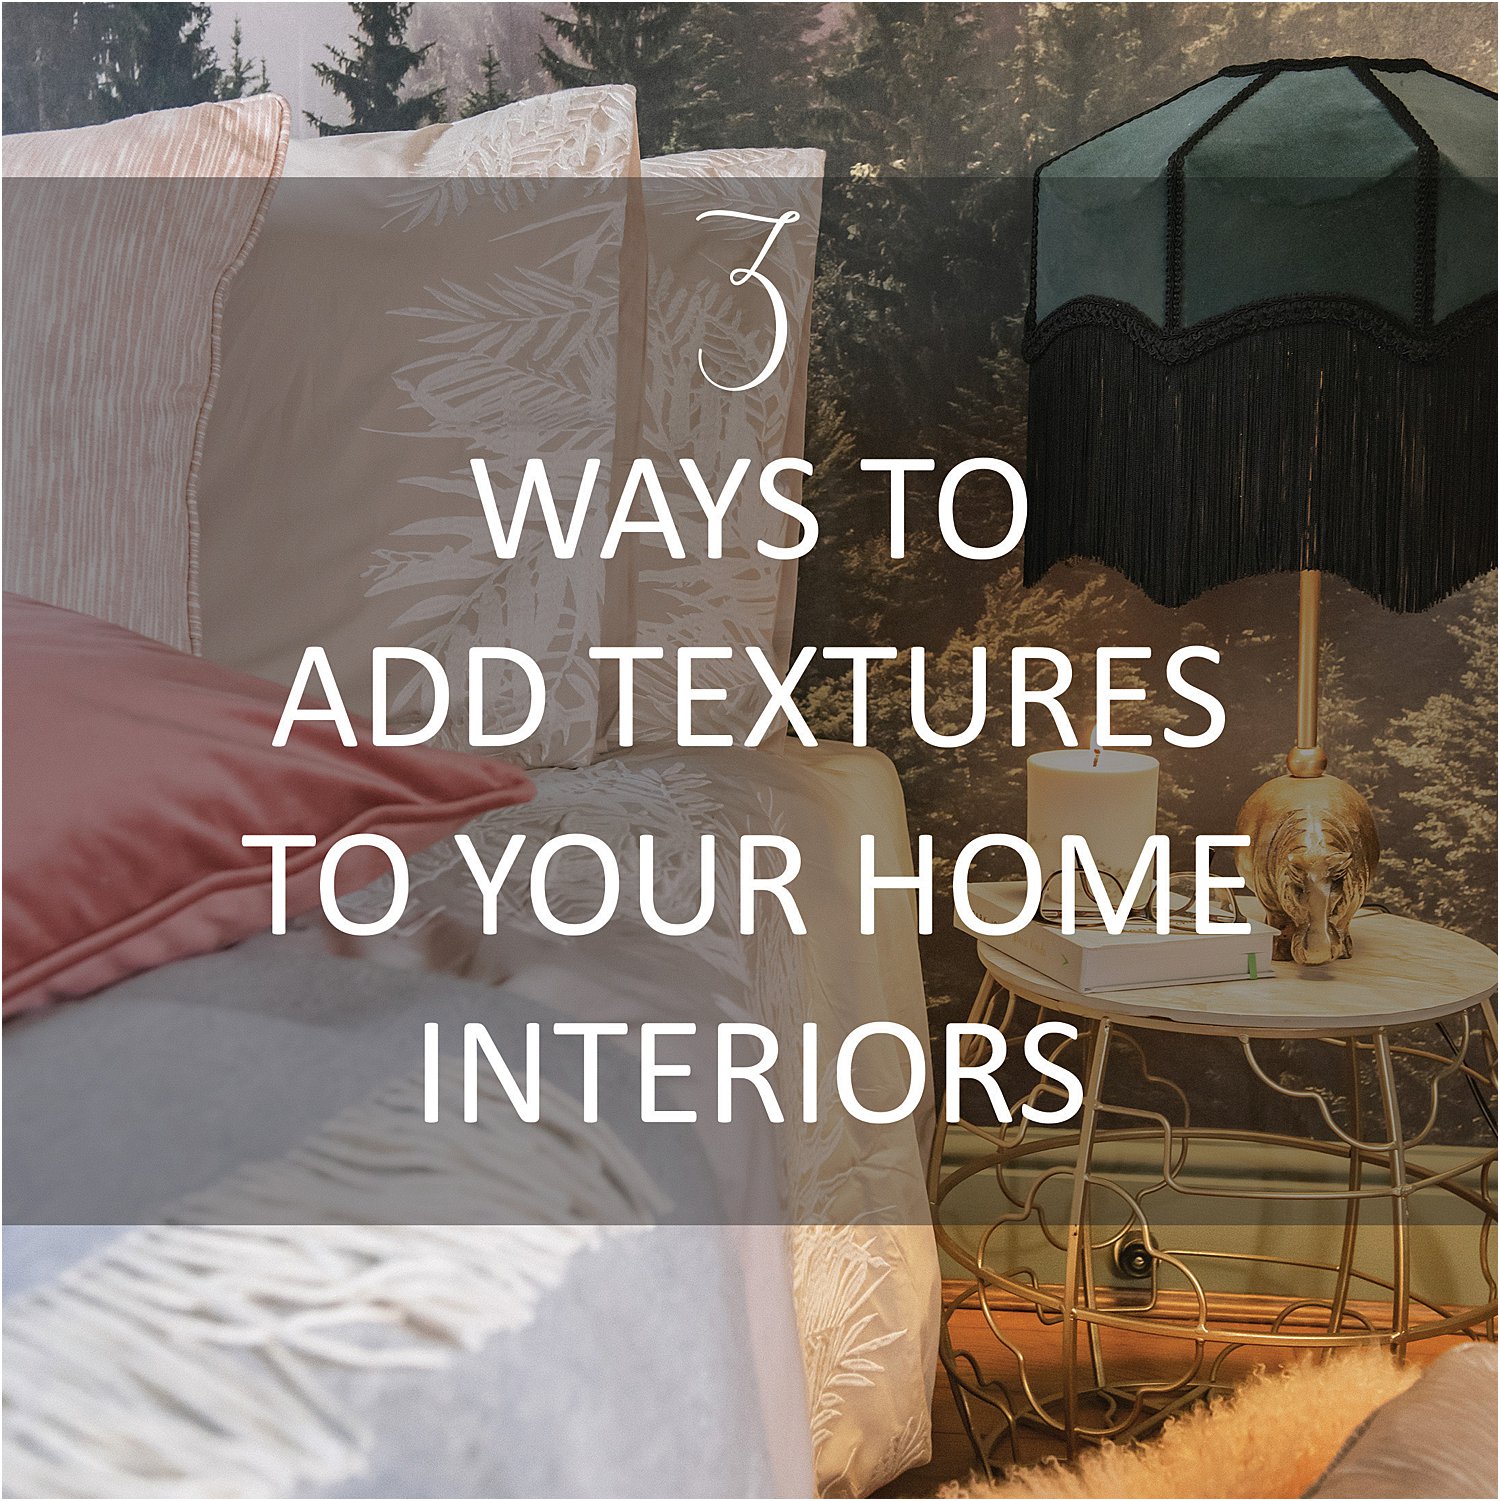 3-ways-to-add-texture-to-your-home-textured-lives-designs